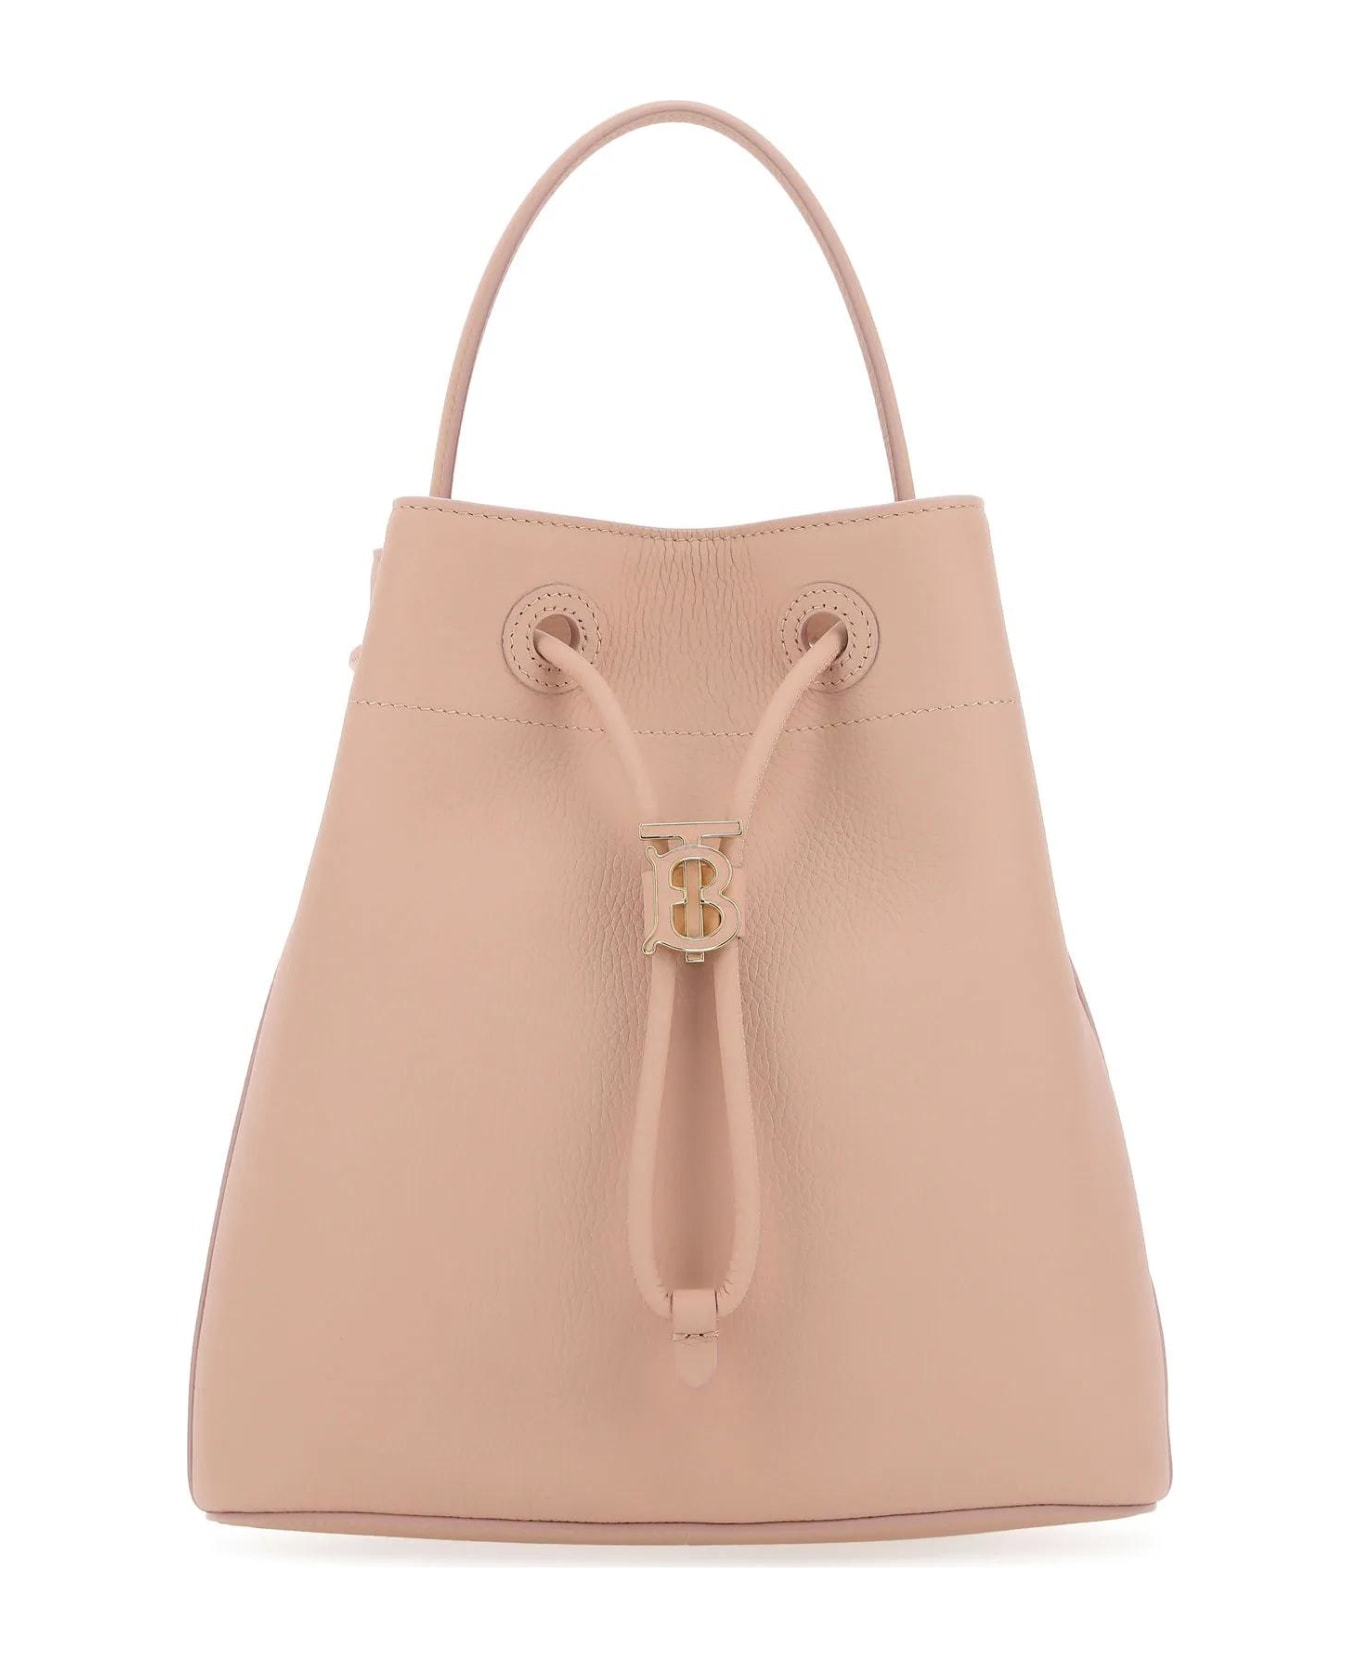 Burberry Pink Leather Small Tb Bucket Bag - A3661